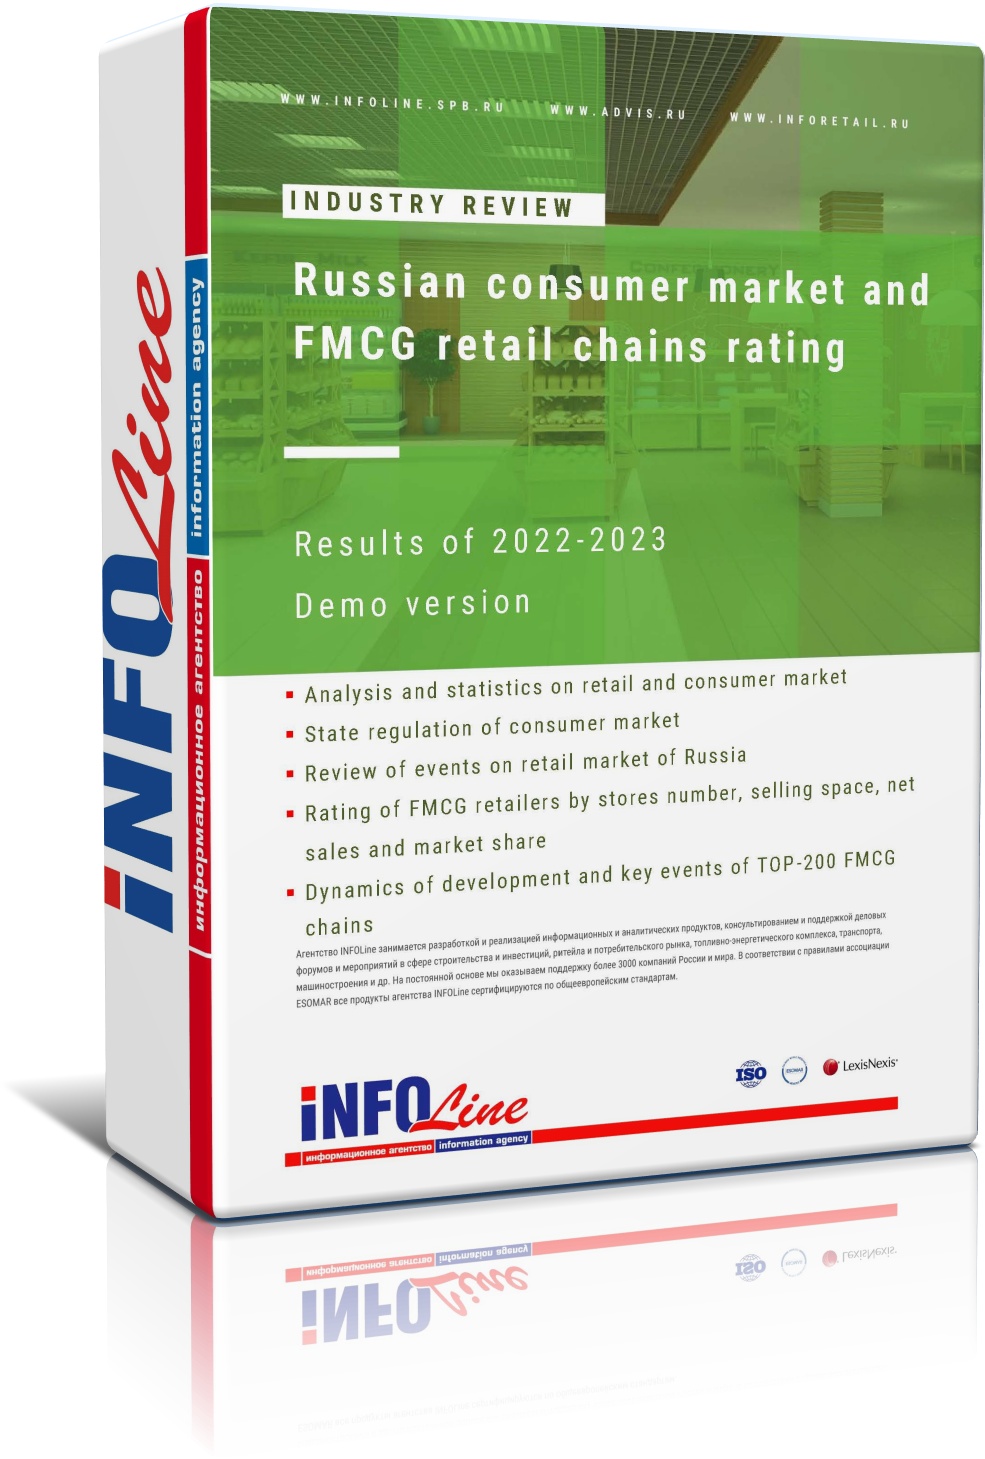 "Russian consumer market and FMCG retail chains rating: Results of 2022-2023"